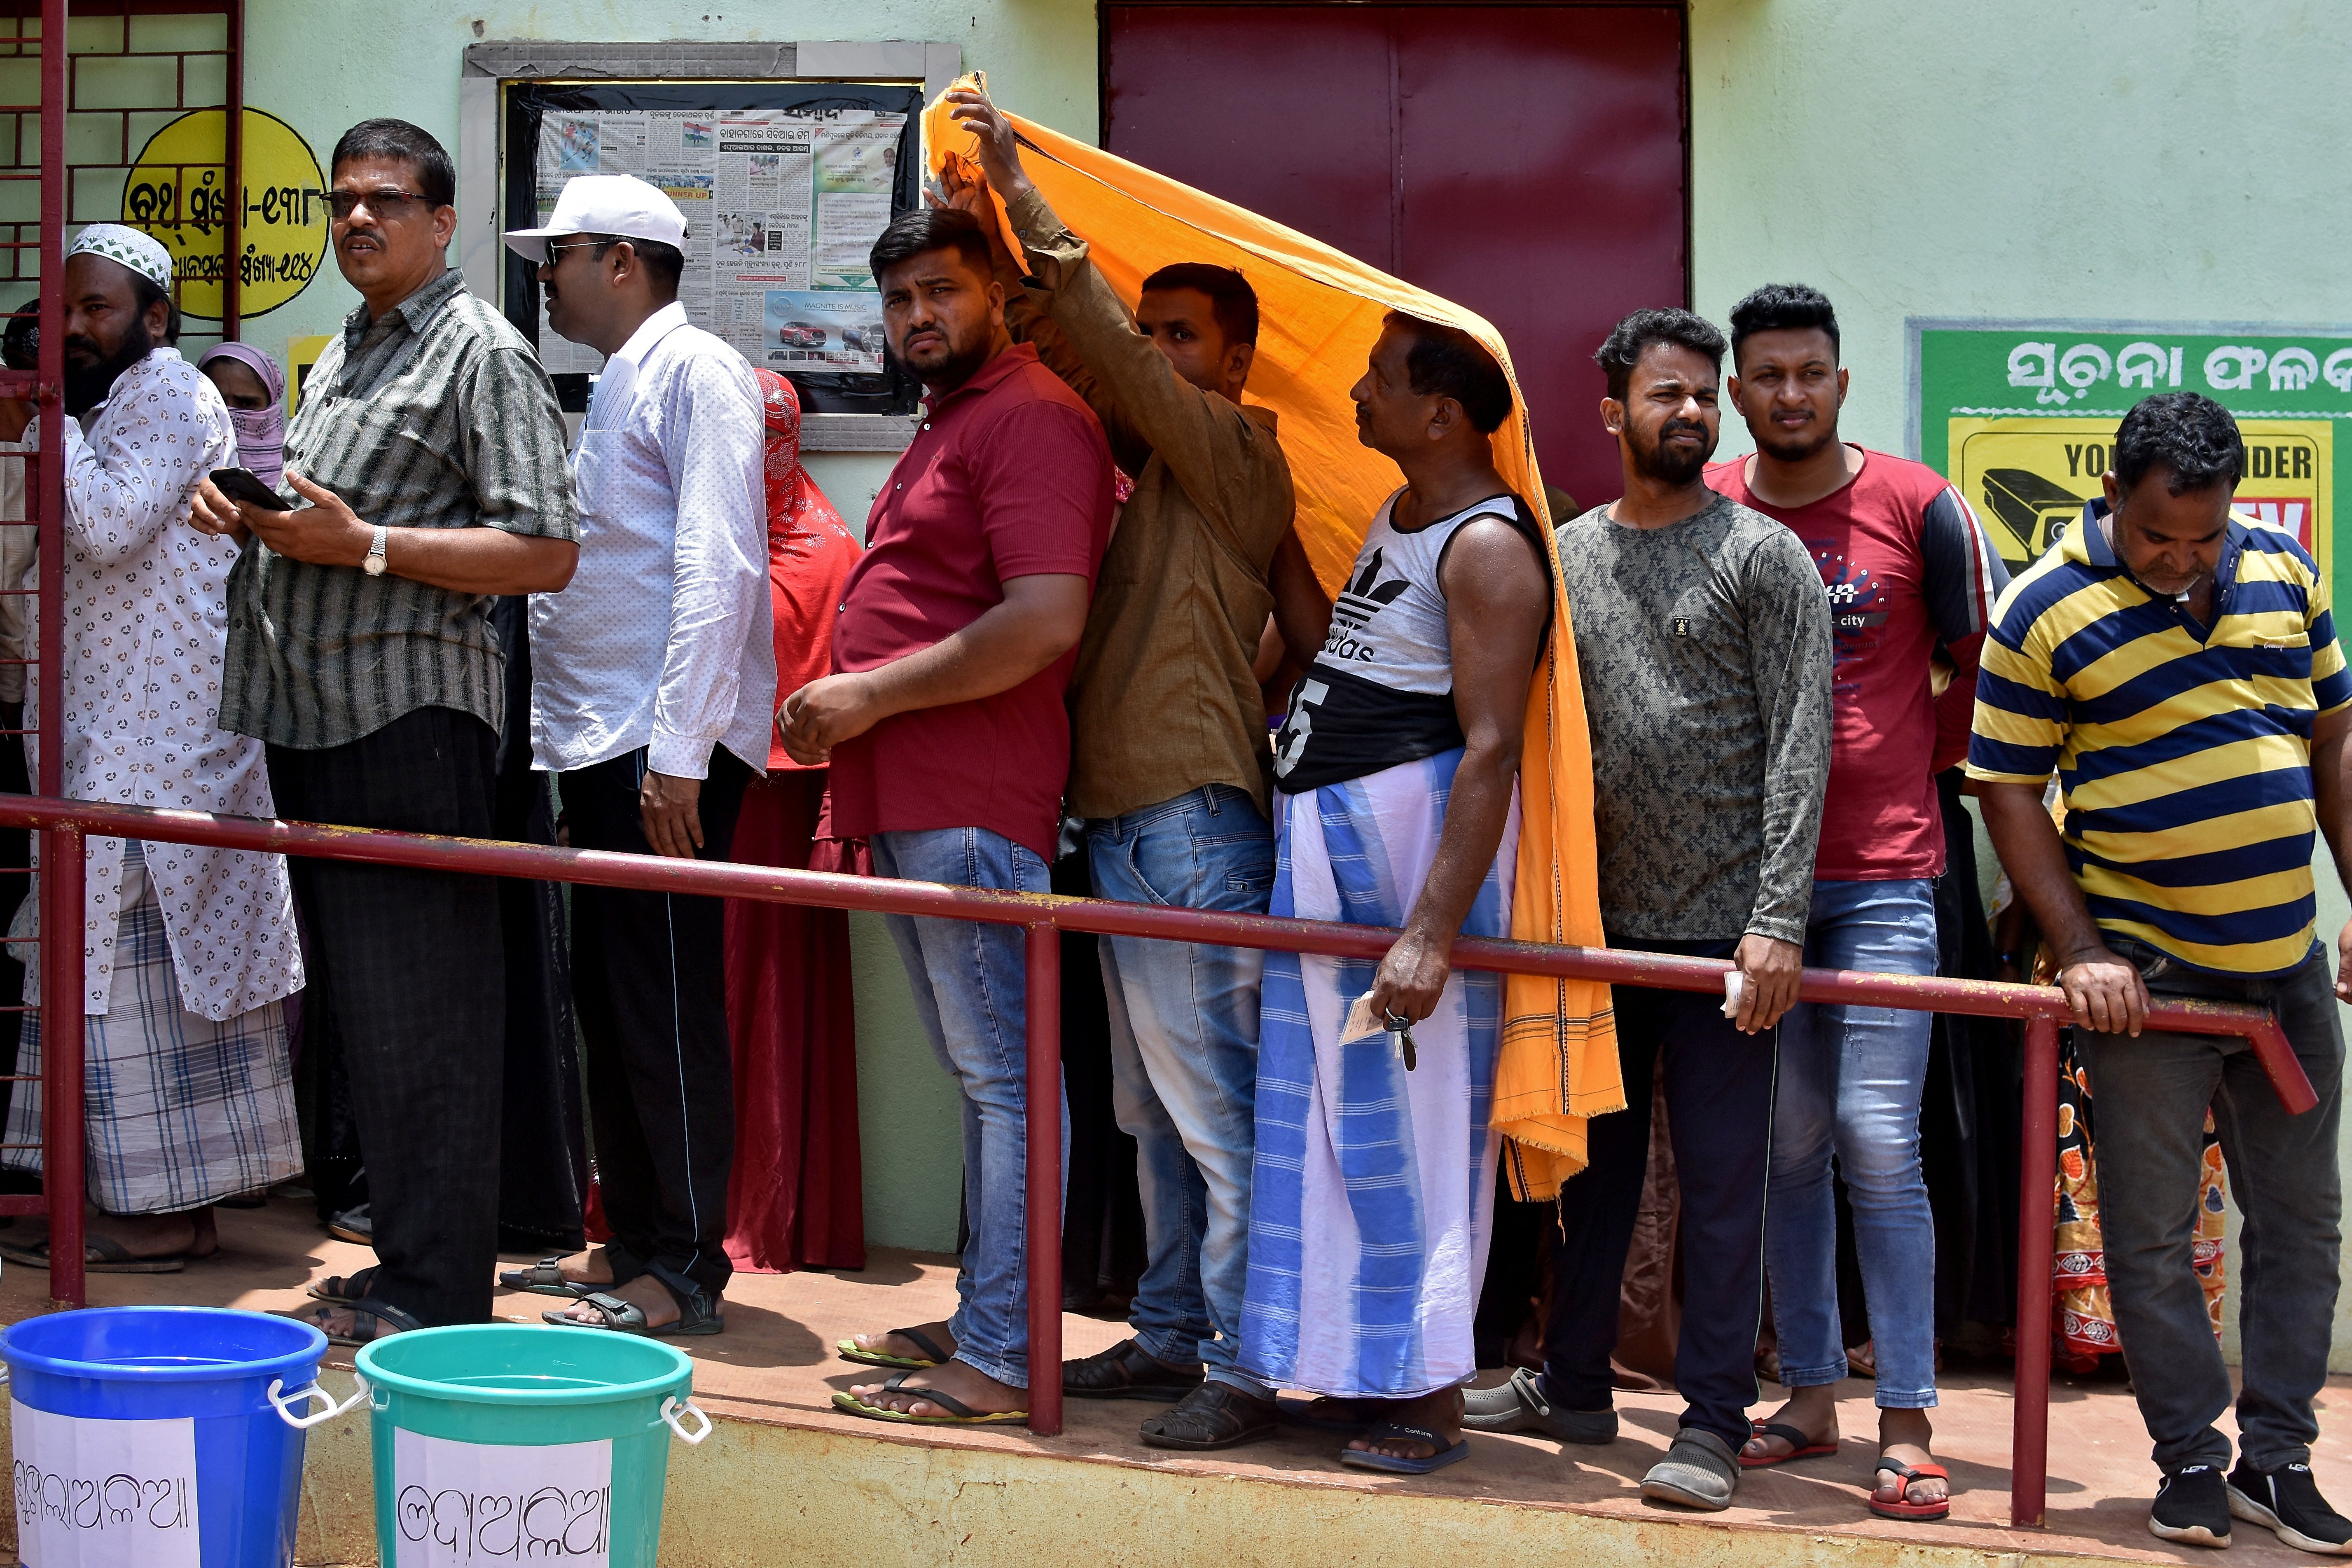 Men use a stole to cover from heat as they wait in a line outside a polling station to cast their votes during the sixth phase of India's general election, on a hot summer day in Bhubaneswar, India